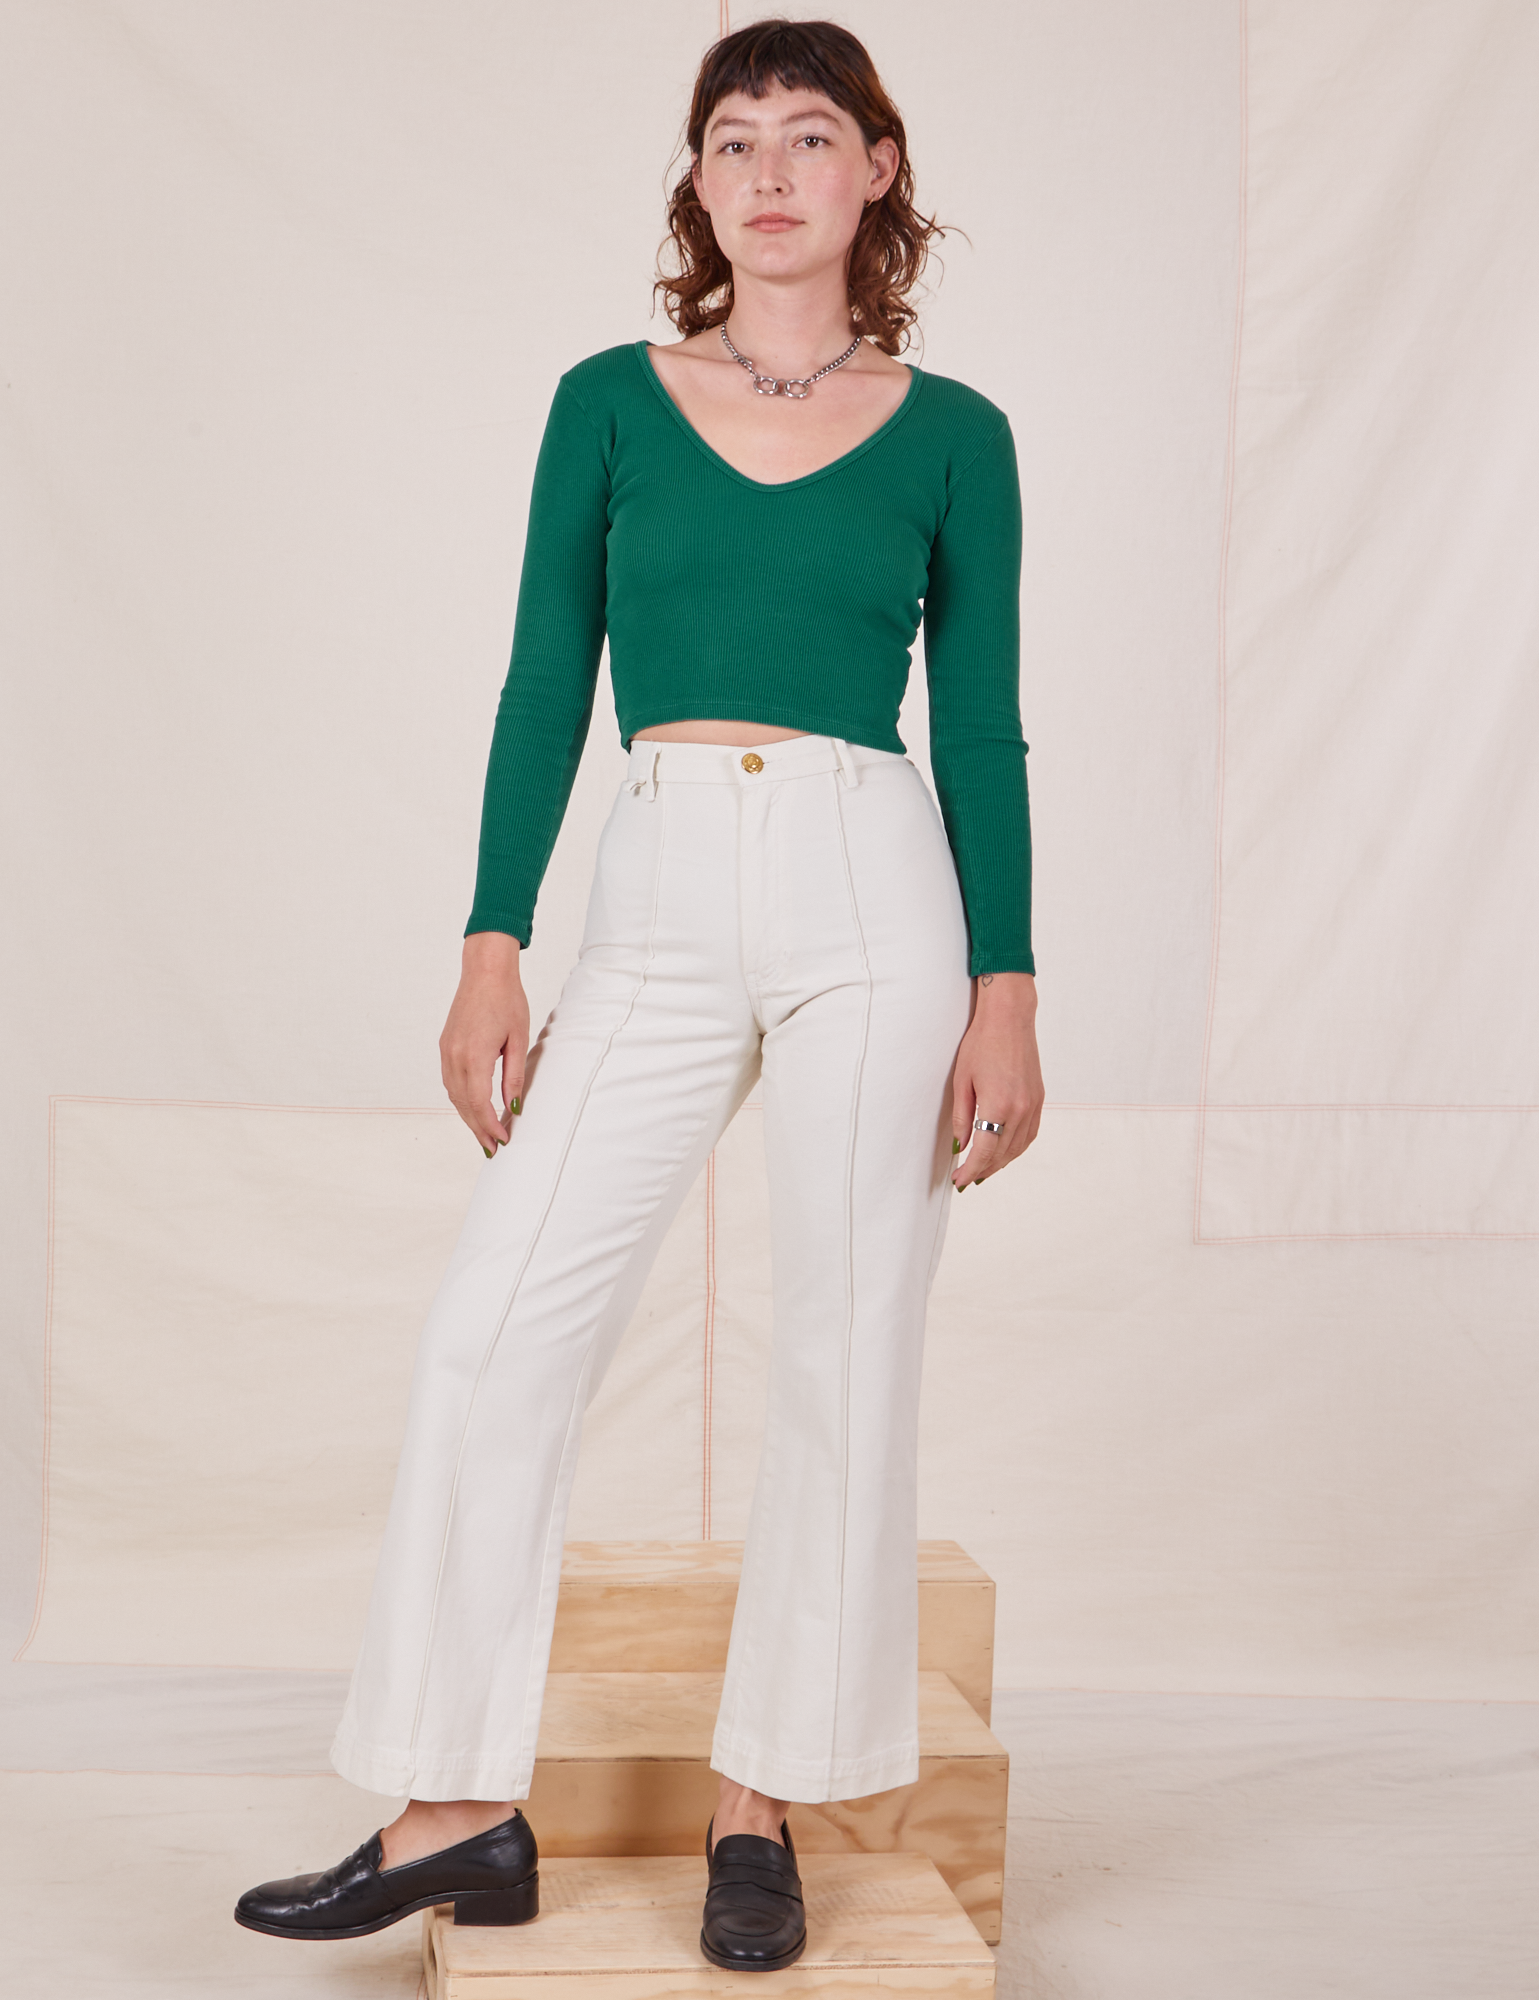 Alex is wearing Long Sleeve V-Neck Tee in Hunter Green and vintage tee off-white Western Pants